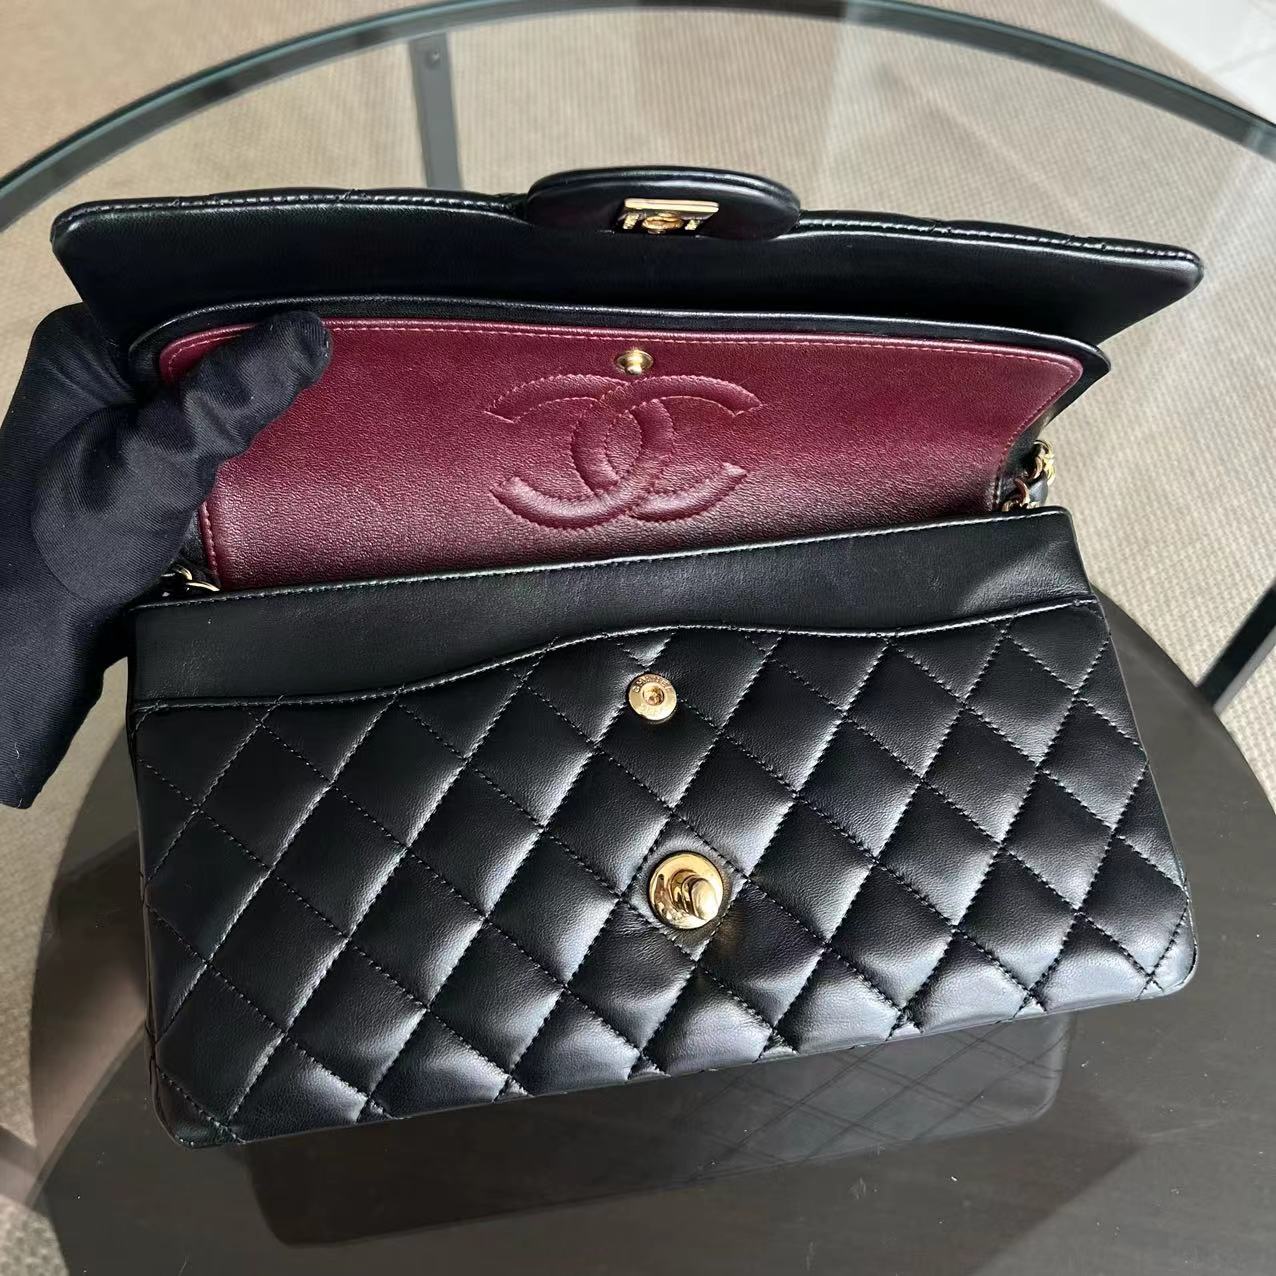 Chanel Medium Classic Flap Double Flap Quilted Lambskin Black GHW No 15